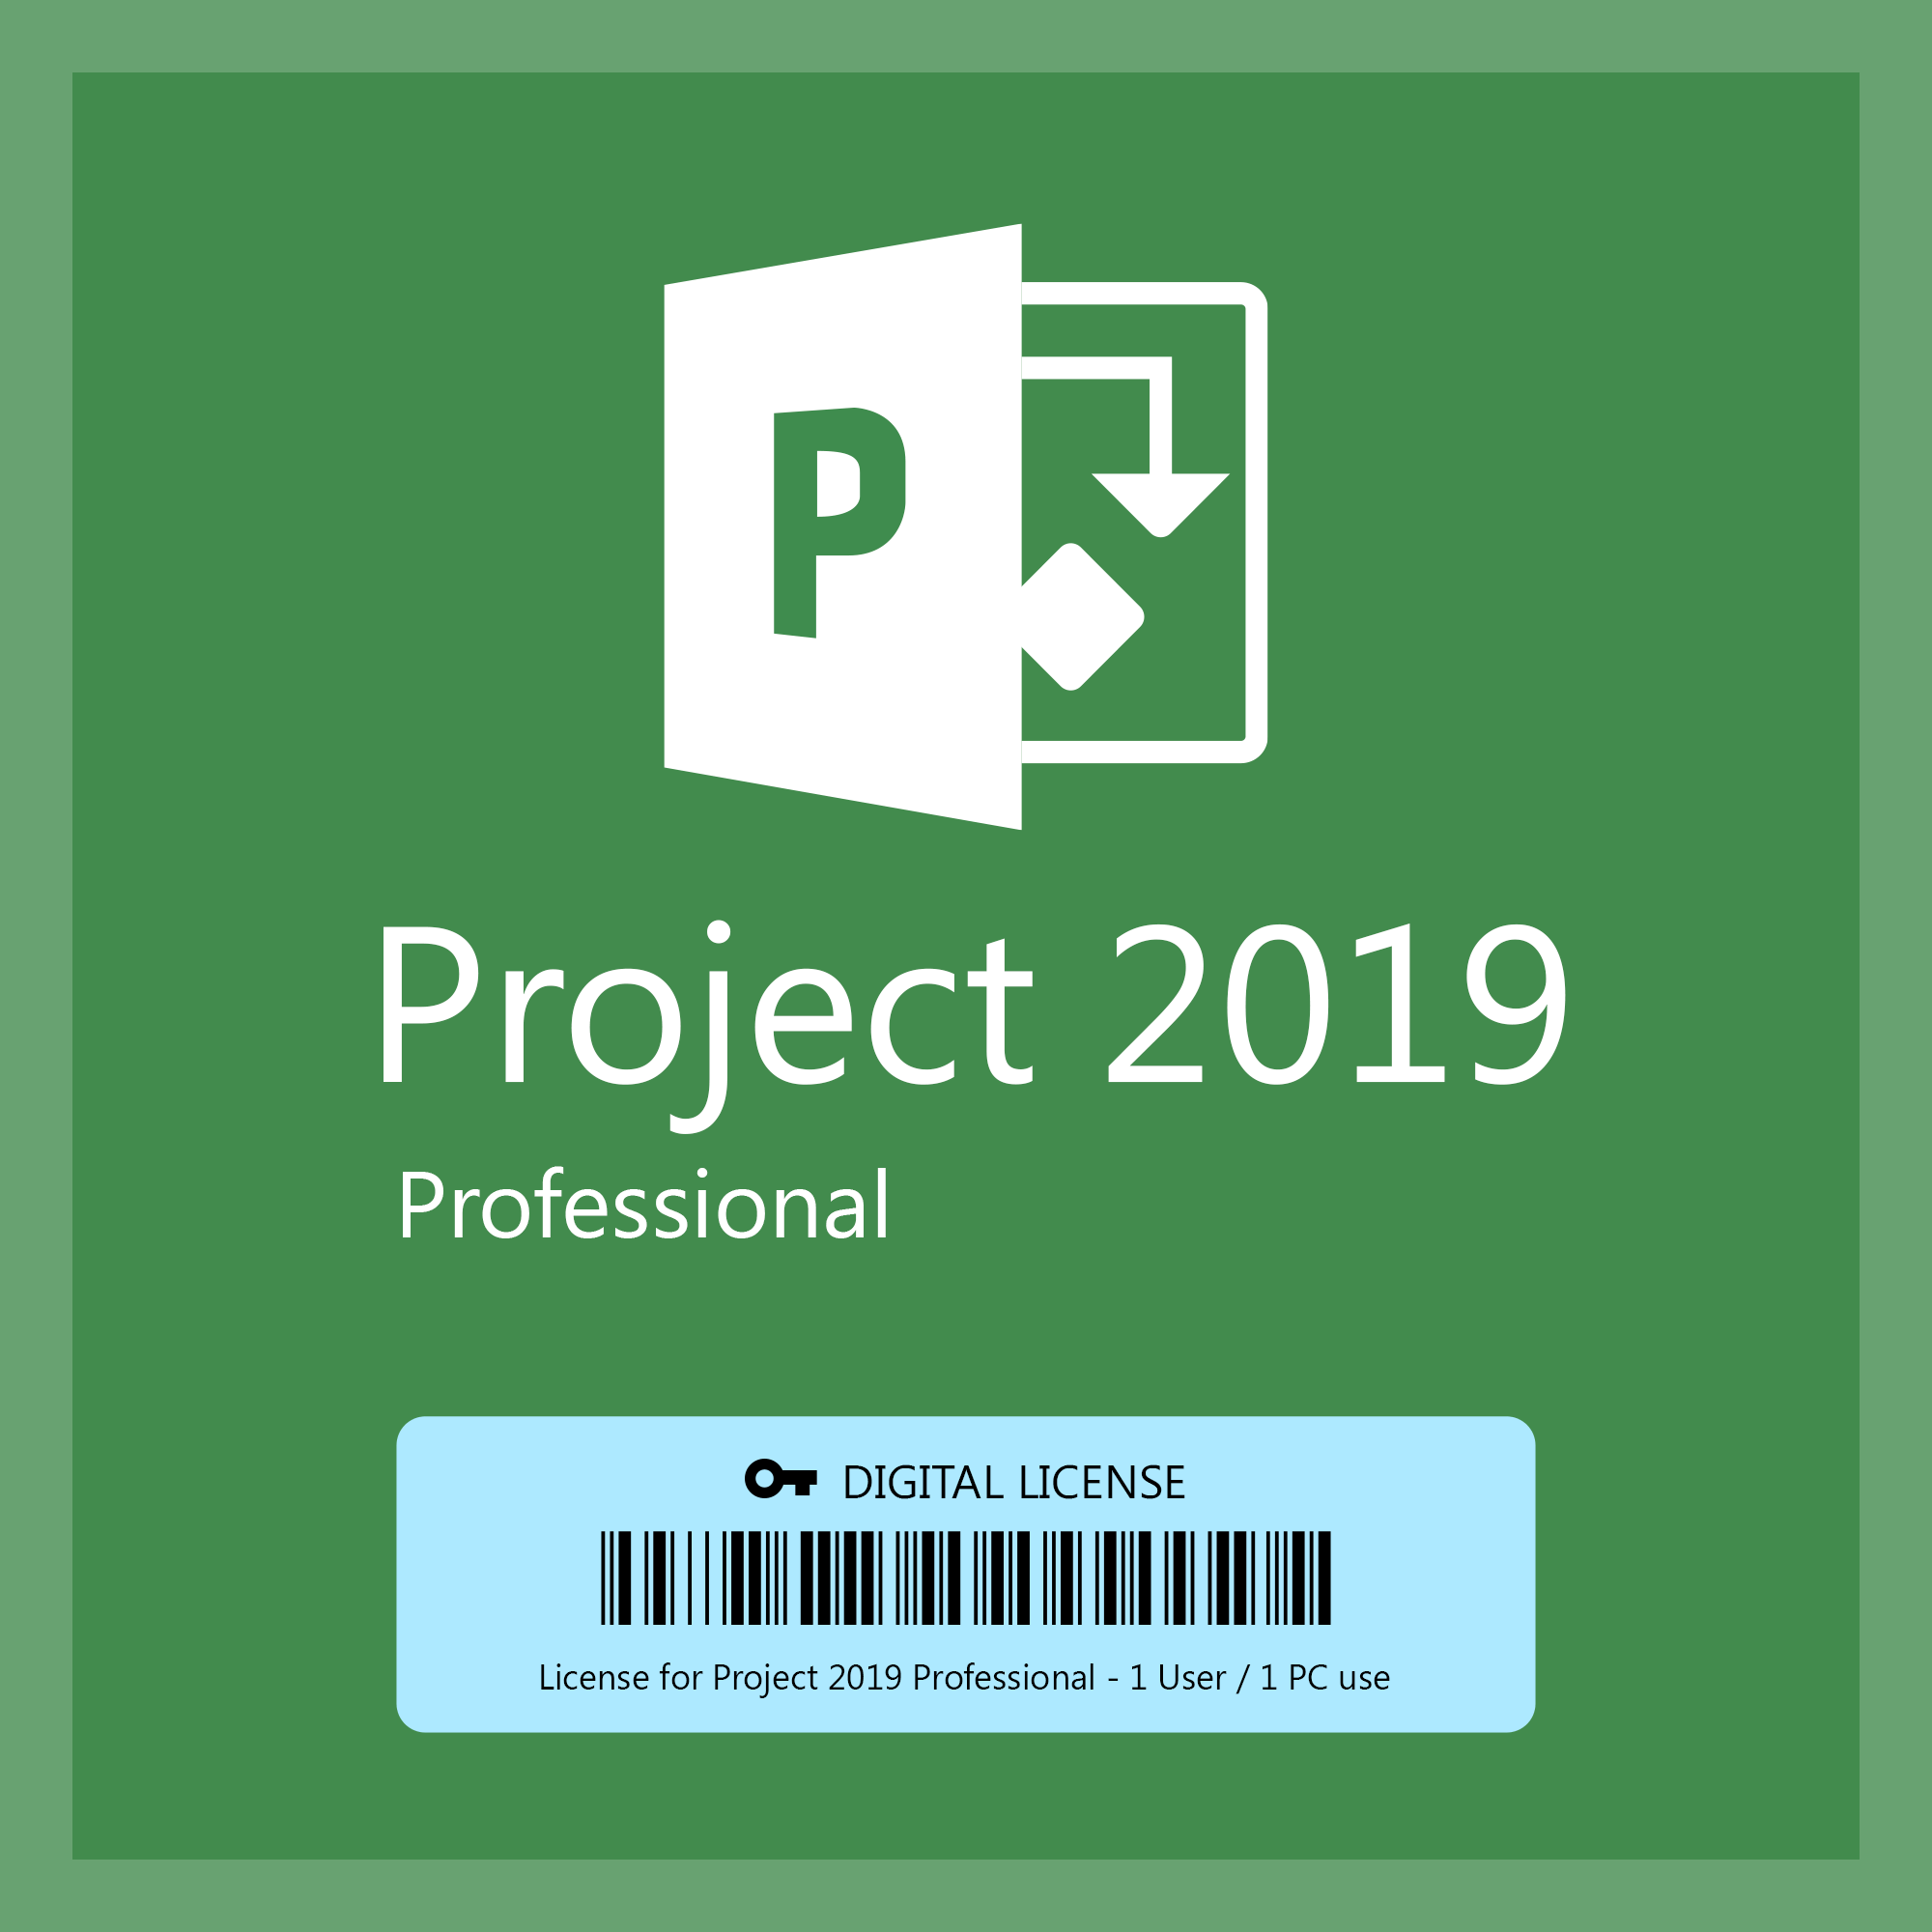 Microsoft Project 2019 Professional - Activation Code